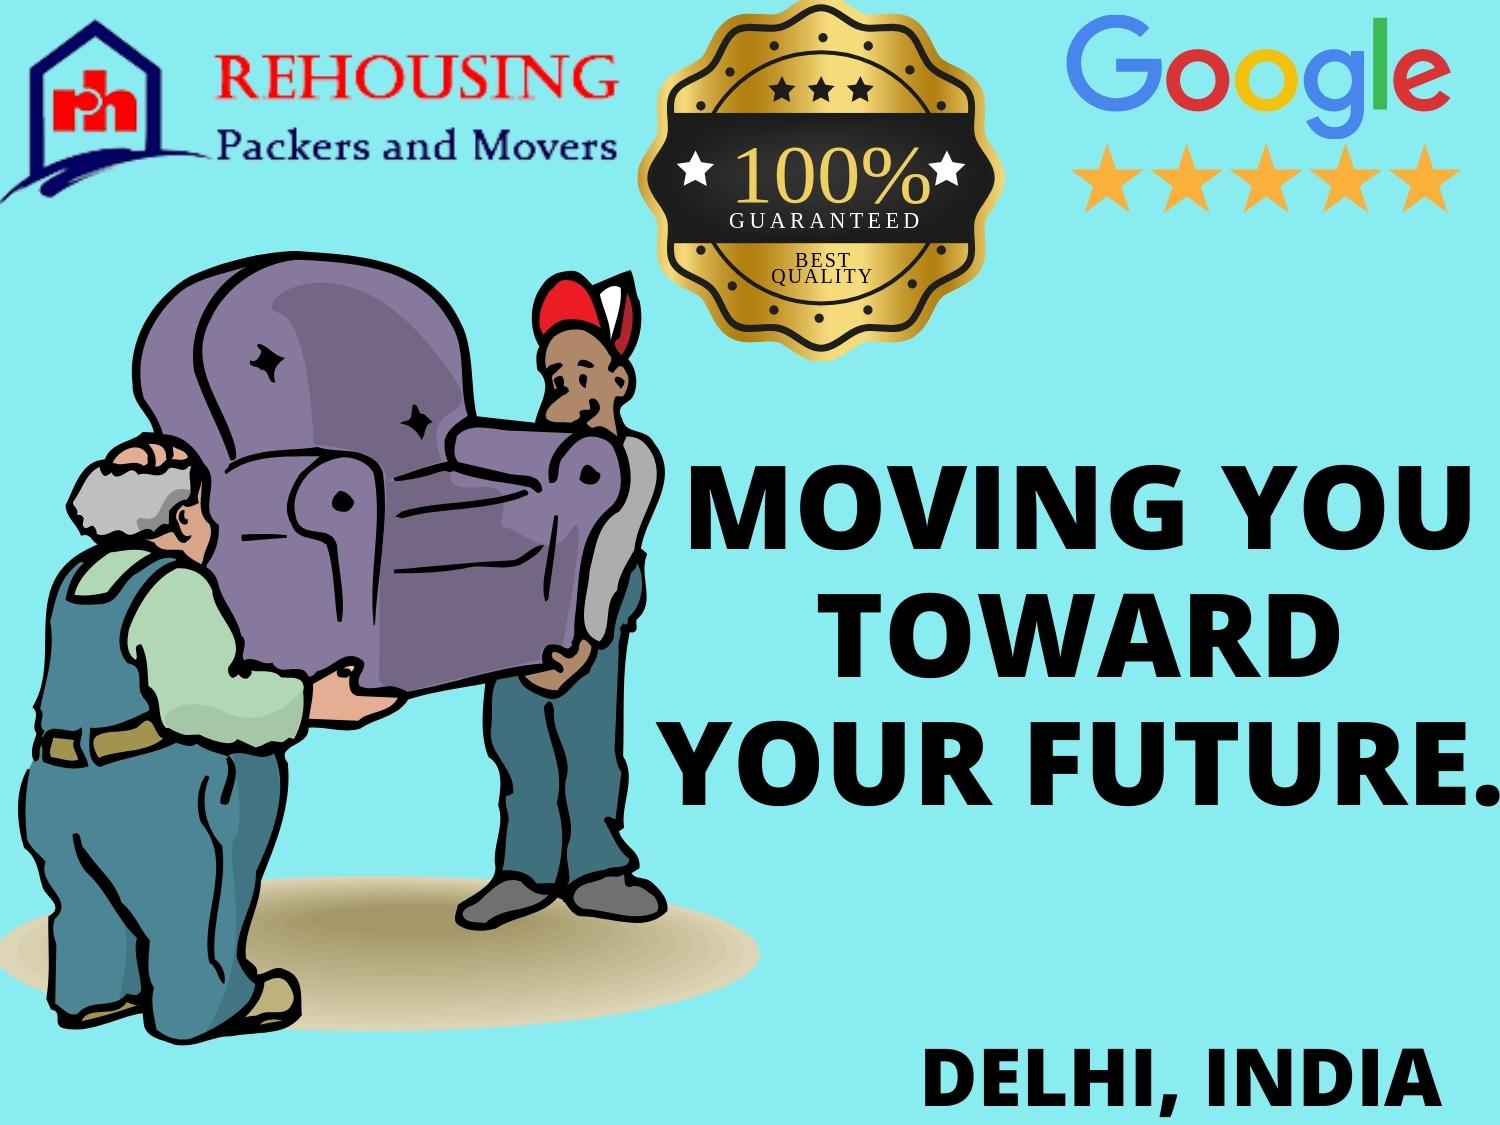 benefits you get for using Packers and Movers in Delhi